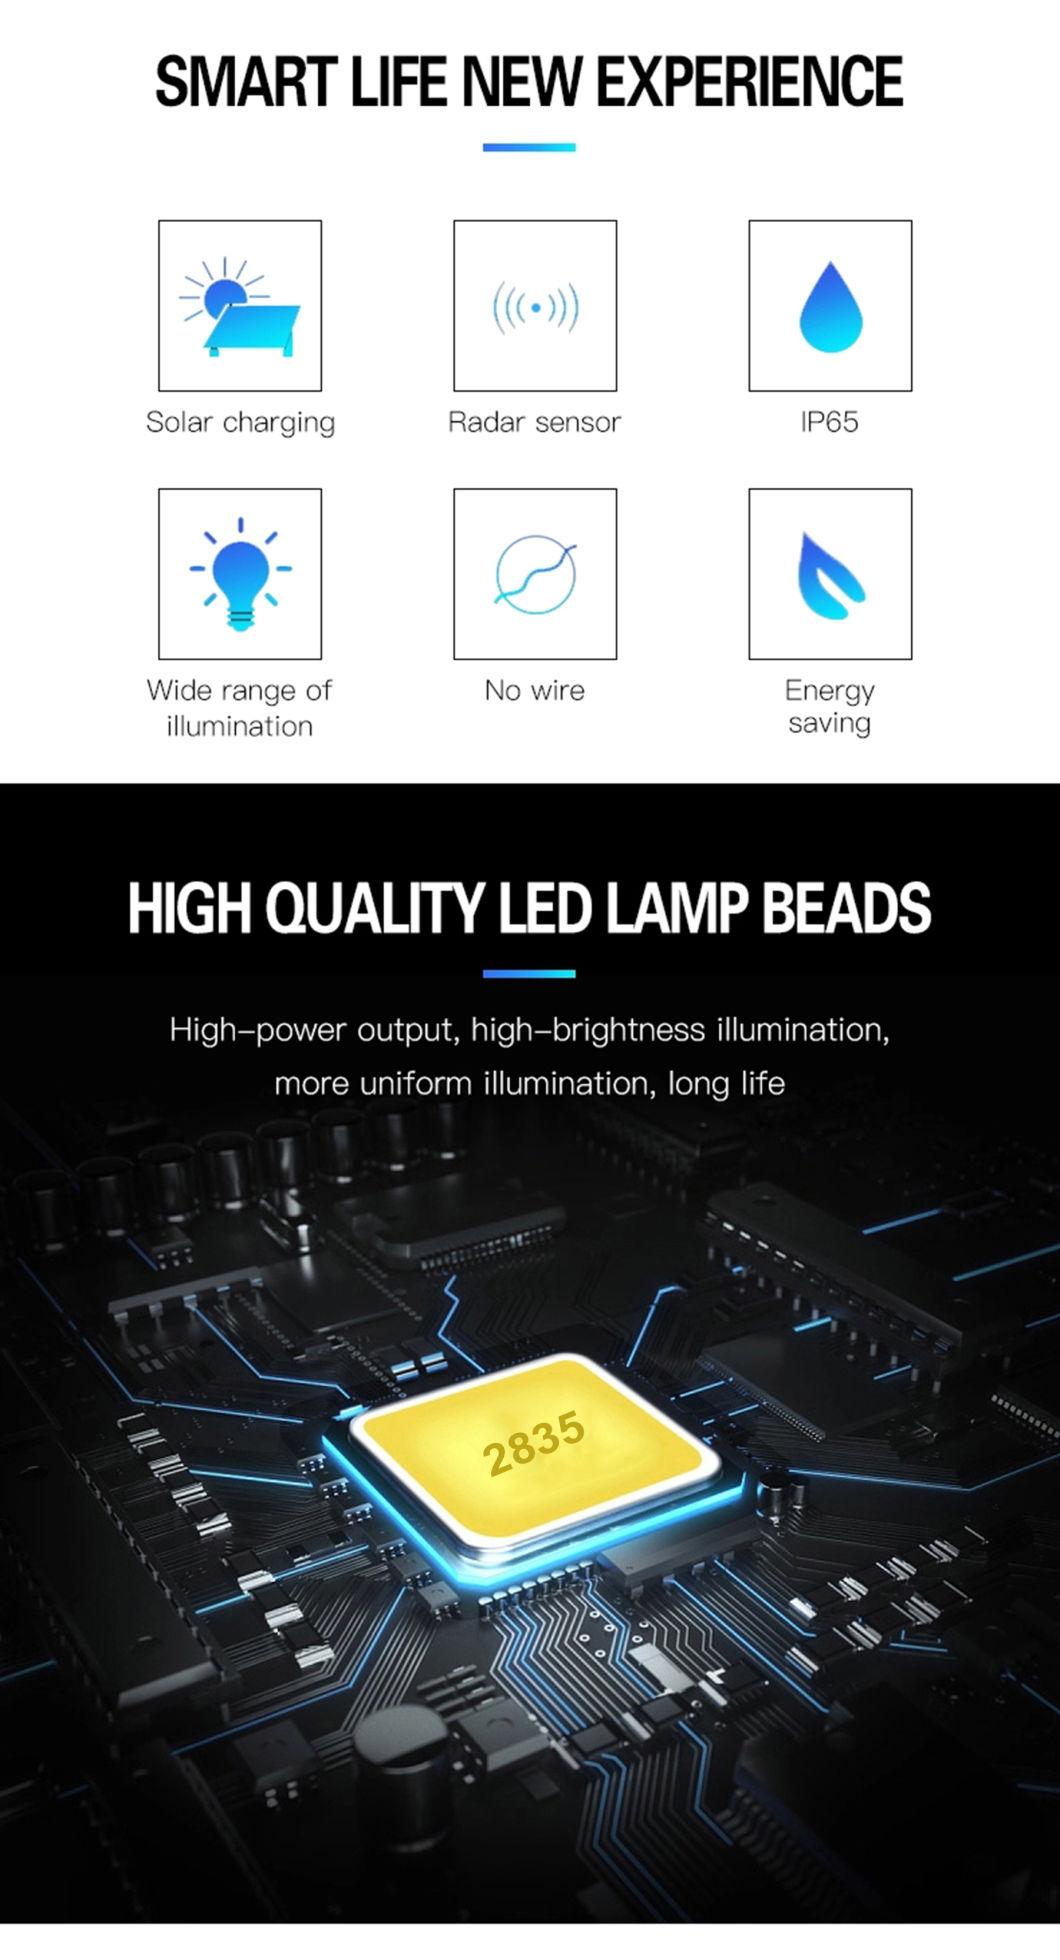 Home/Yard/Backyard/House/Garage/Garden/Playground Eco-Friendly Factories All in One Lamp Li-ion Lithium Battery LED Solar Light